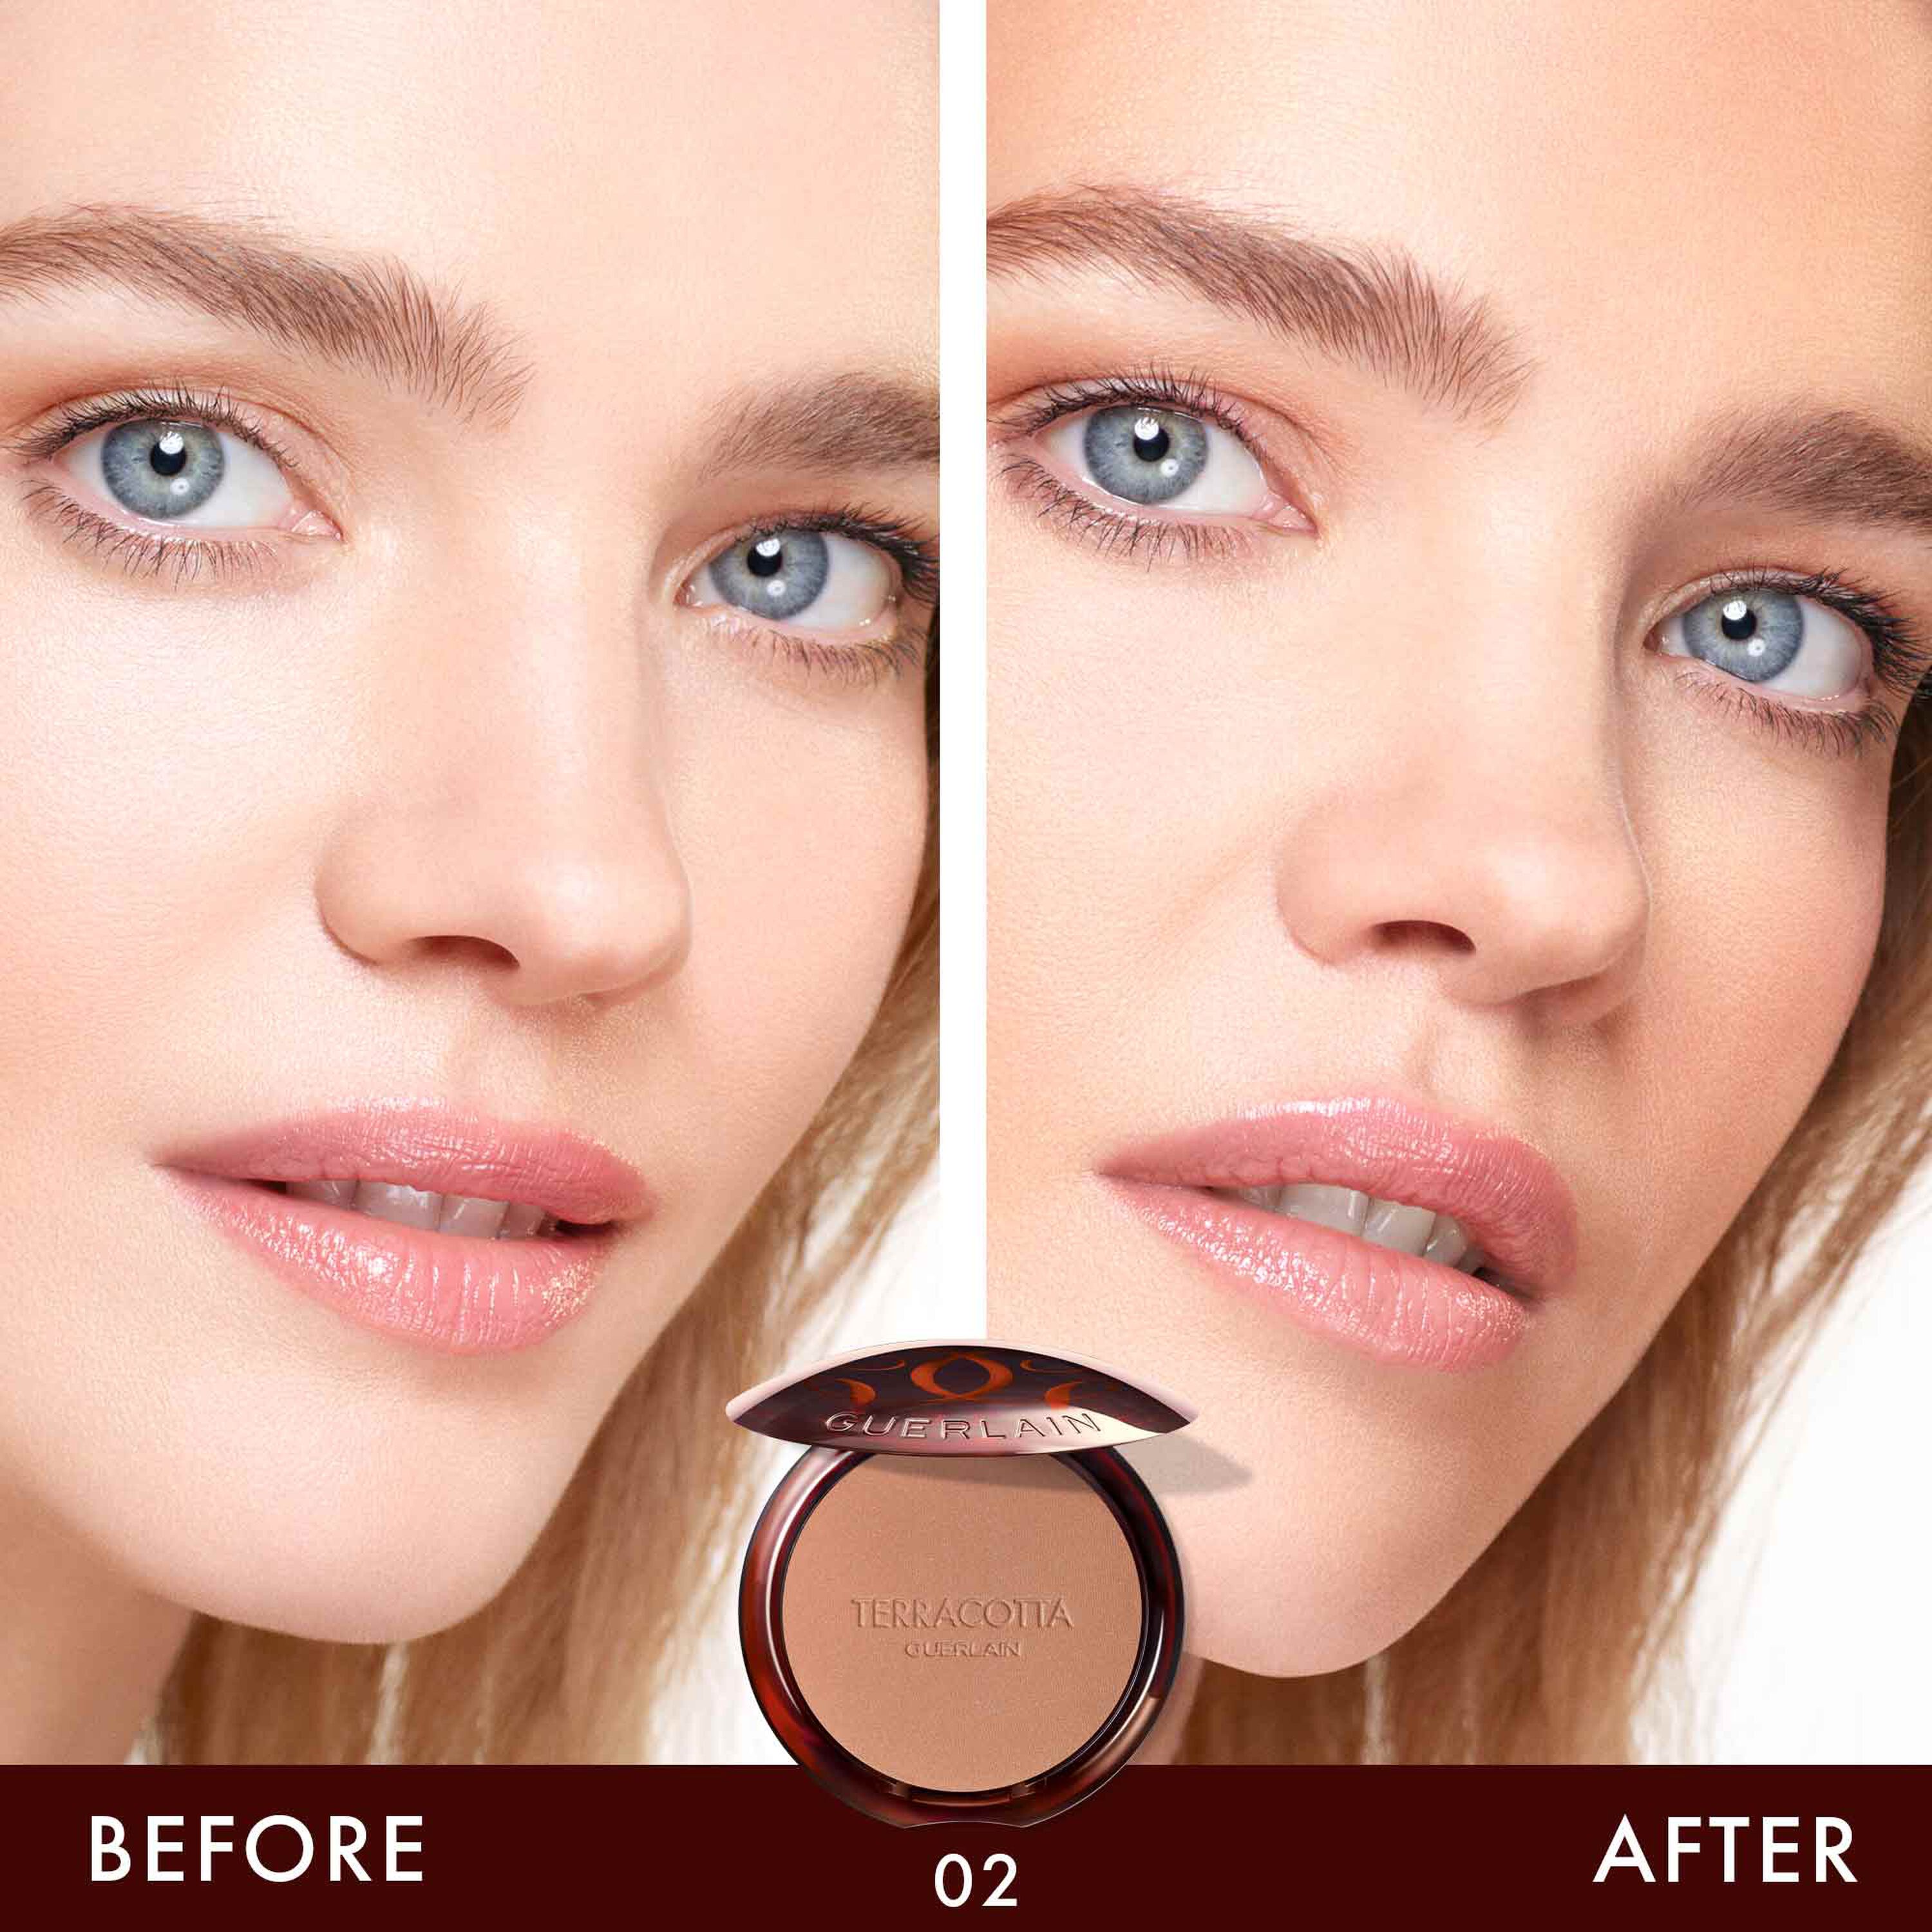 The Bronzing Powder - 96% naturally-derived ingredients (See the picture 3/4)